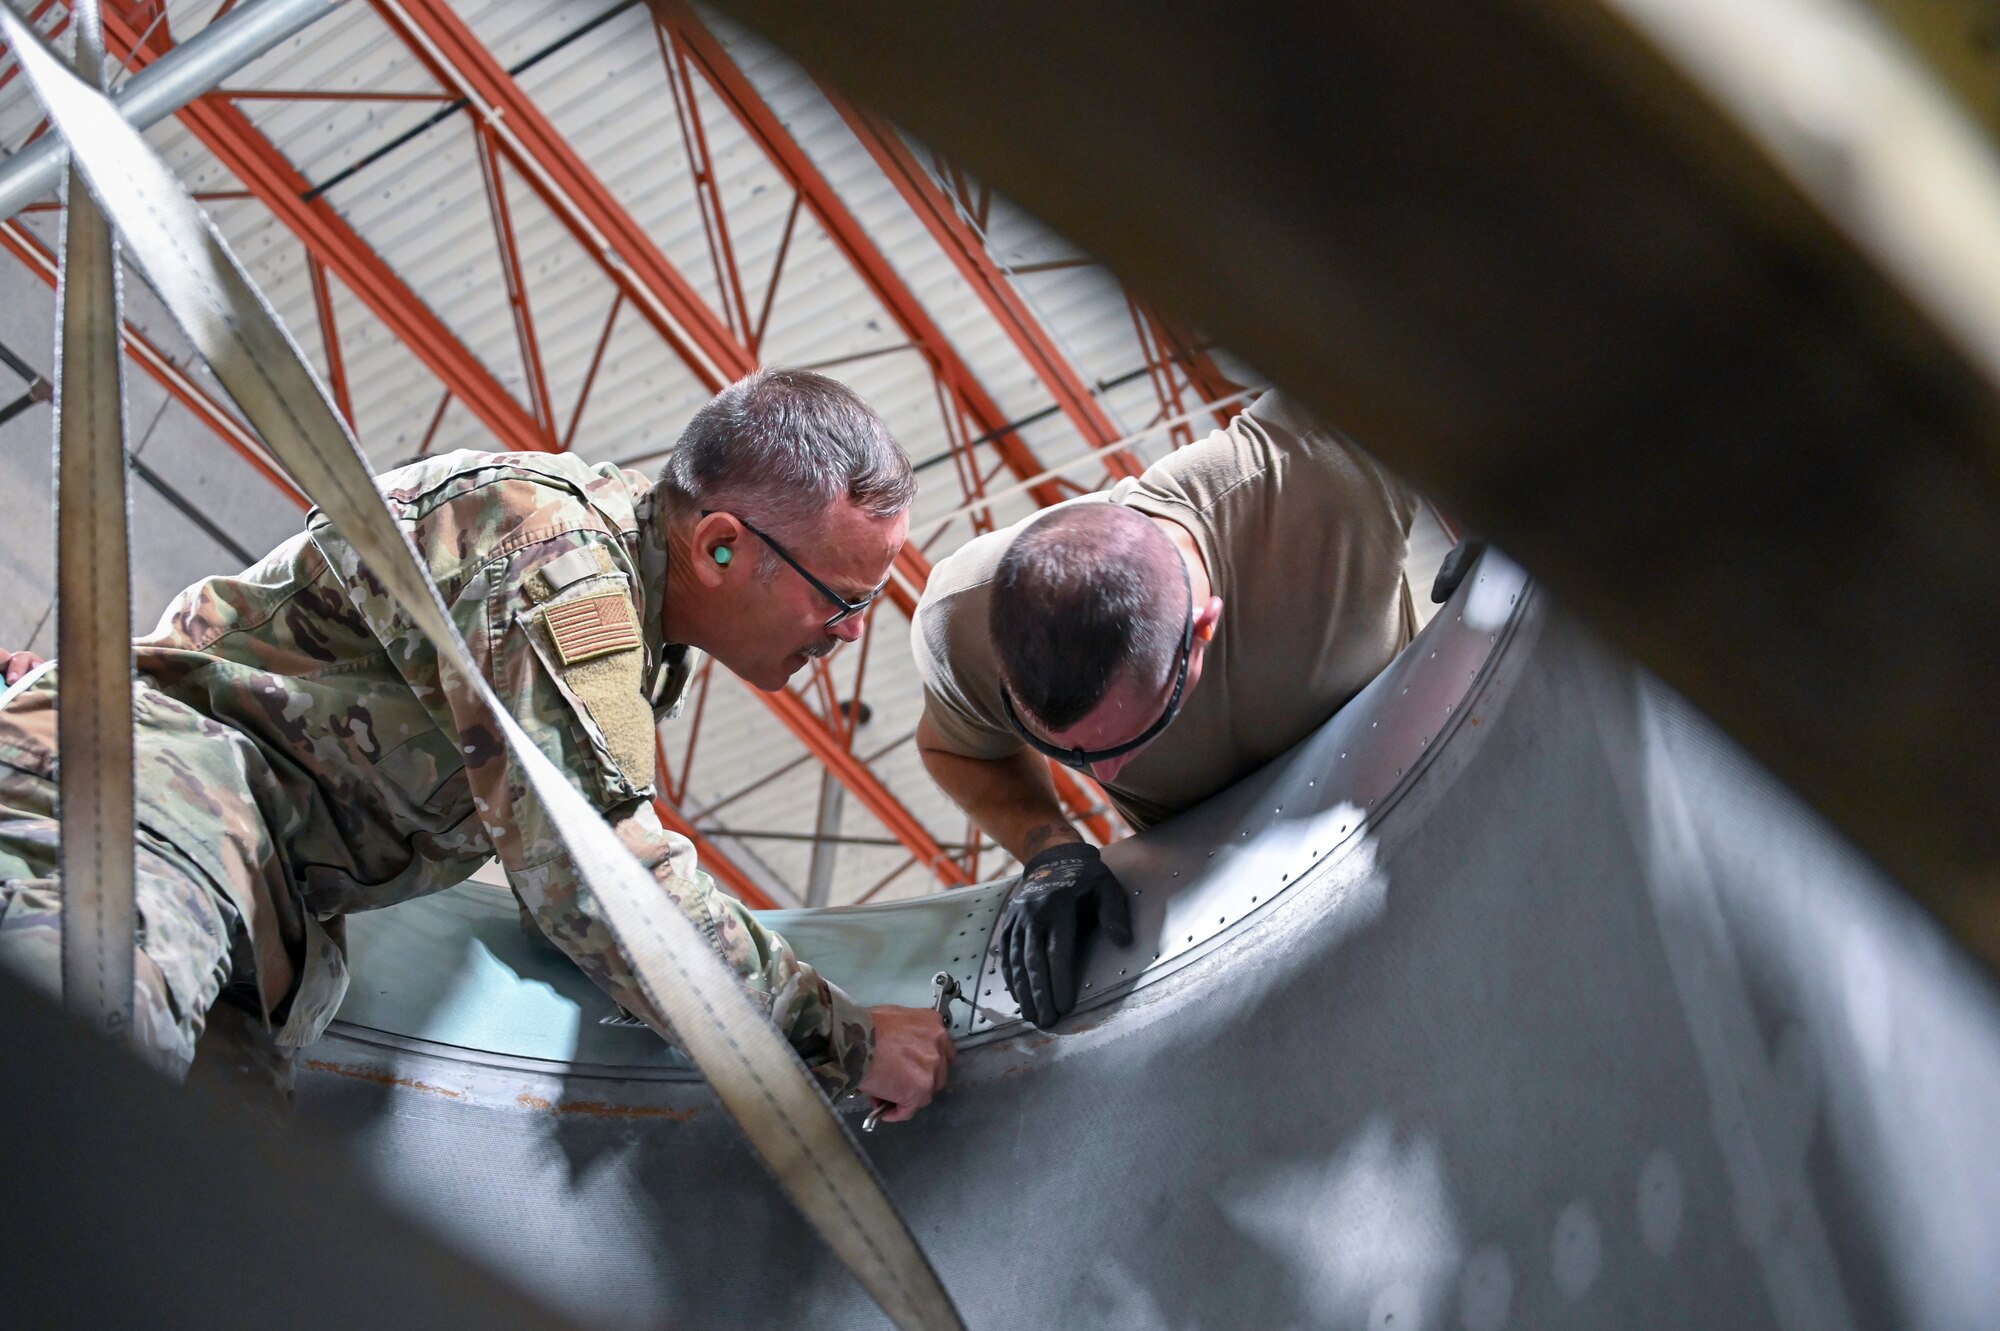 Master Sgt. Harold Fulghum and Senior Master Sgt. James Jenkins, aircraft structural technicians with the 507th Maintenance Squadron, ensure proper alignment of a new engine intake section October 2, 2020, at Tinker Air Force Base, Oklahoma. The structures shop fabricated a part in-house following a bird strike, saving the Air Force more than $1 million. (U.S. Air Force photo by Master Sgt. Grady Epperly)